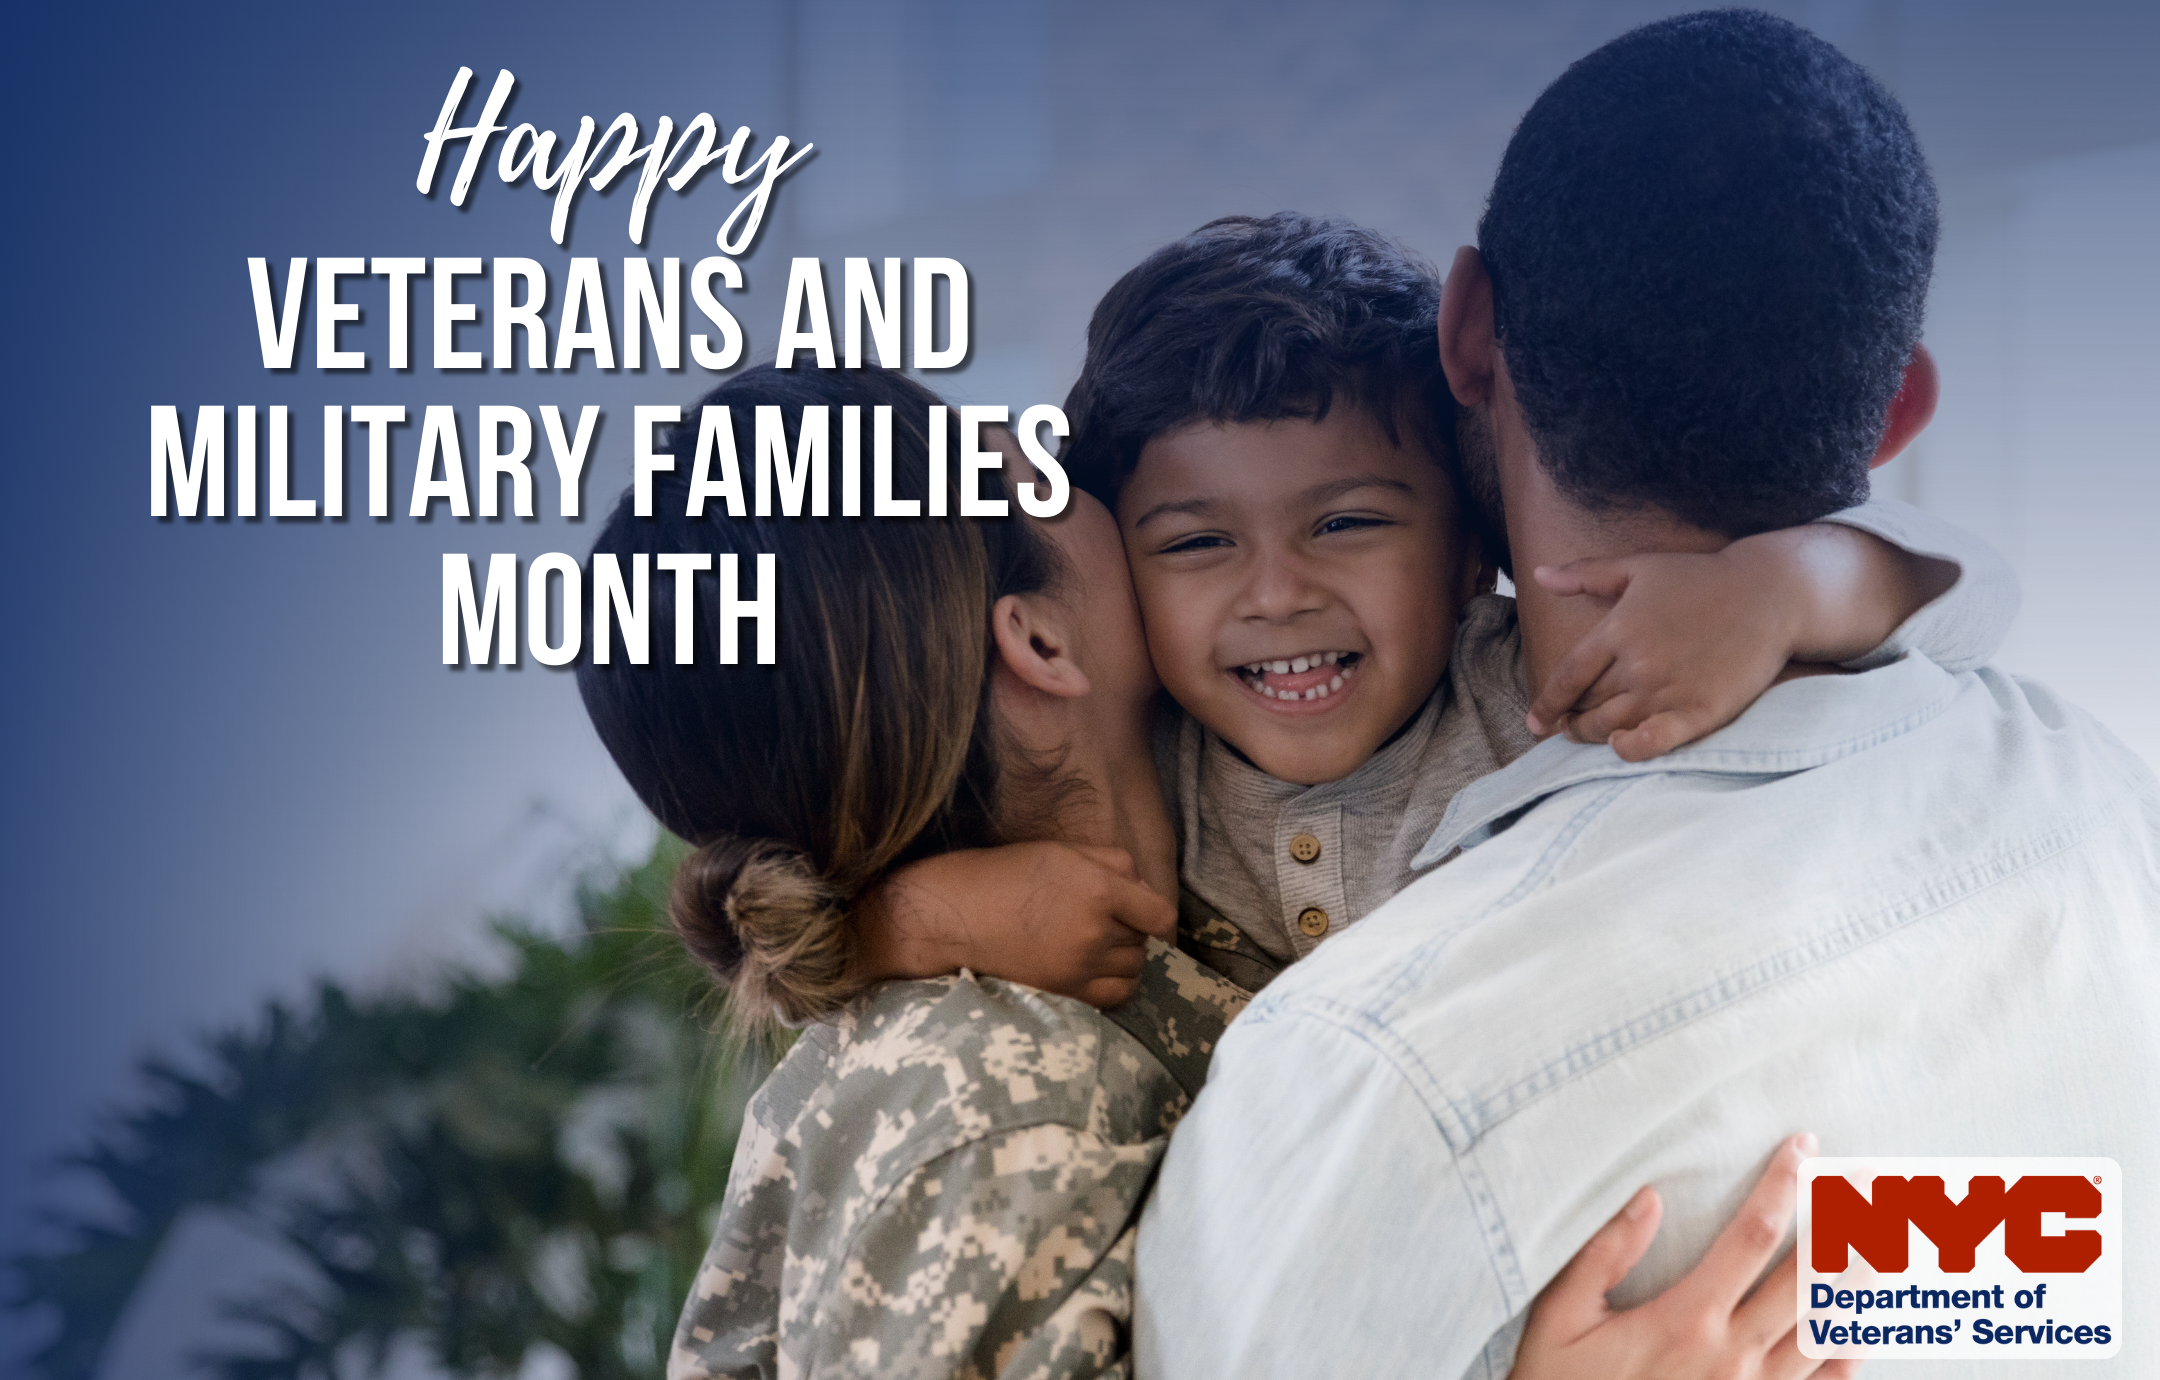 Happy Veterans and Military Families Month
                                           